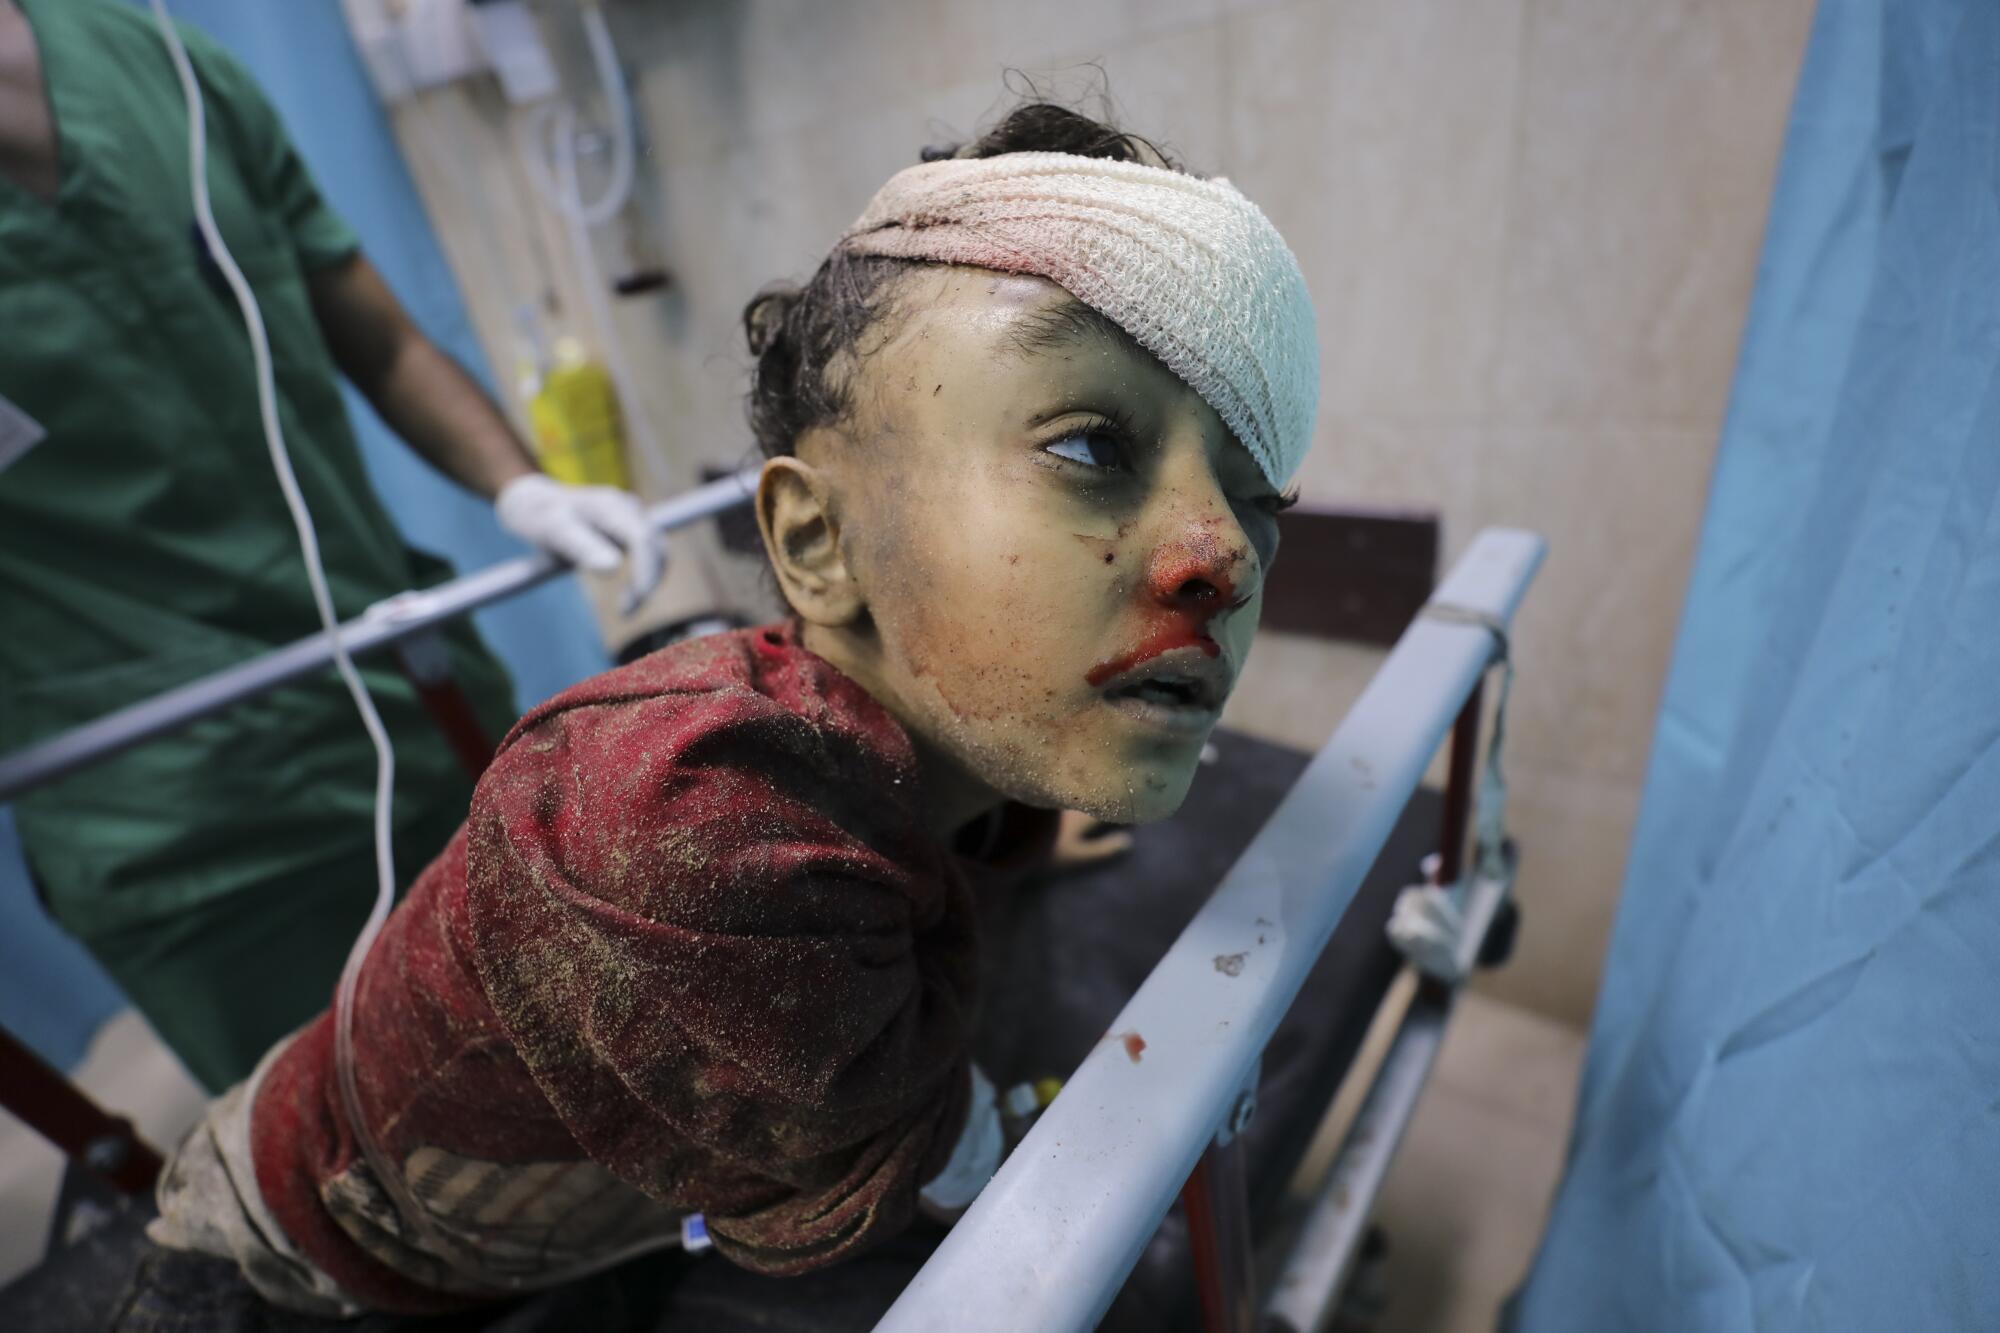 Palestinian child with bandaged head and bloodied face in Gaza hospital